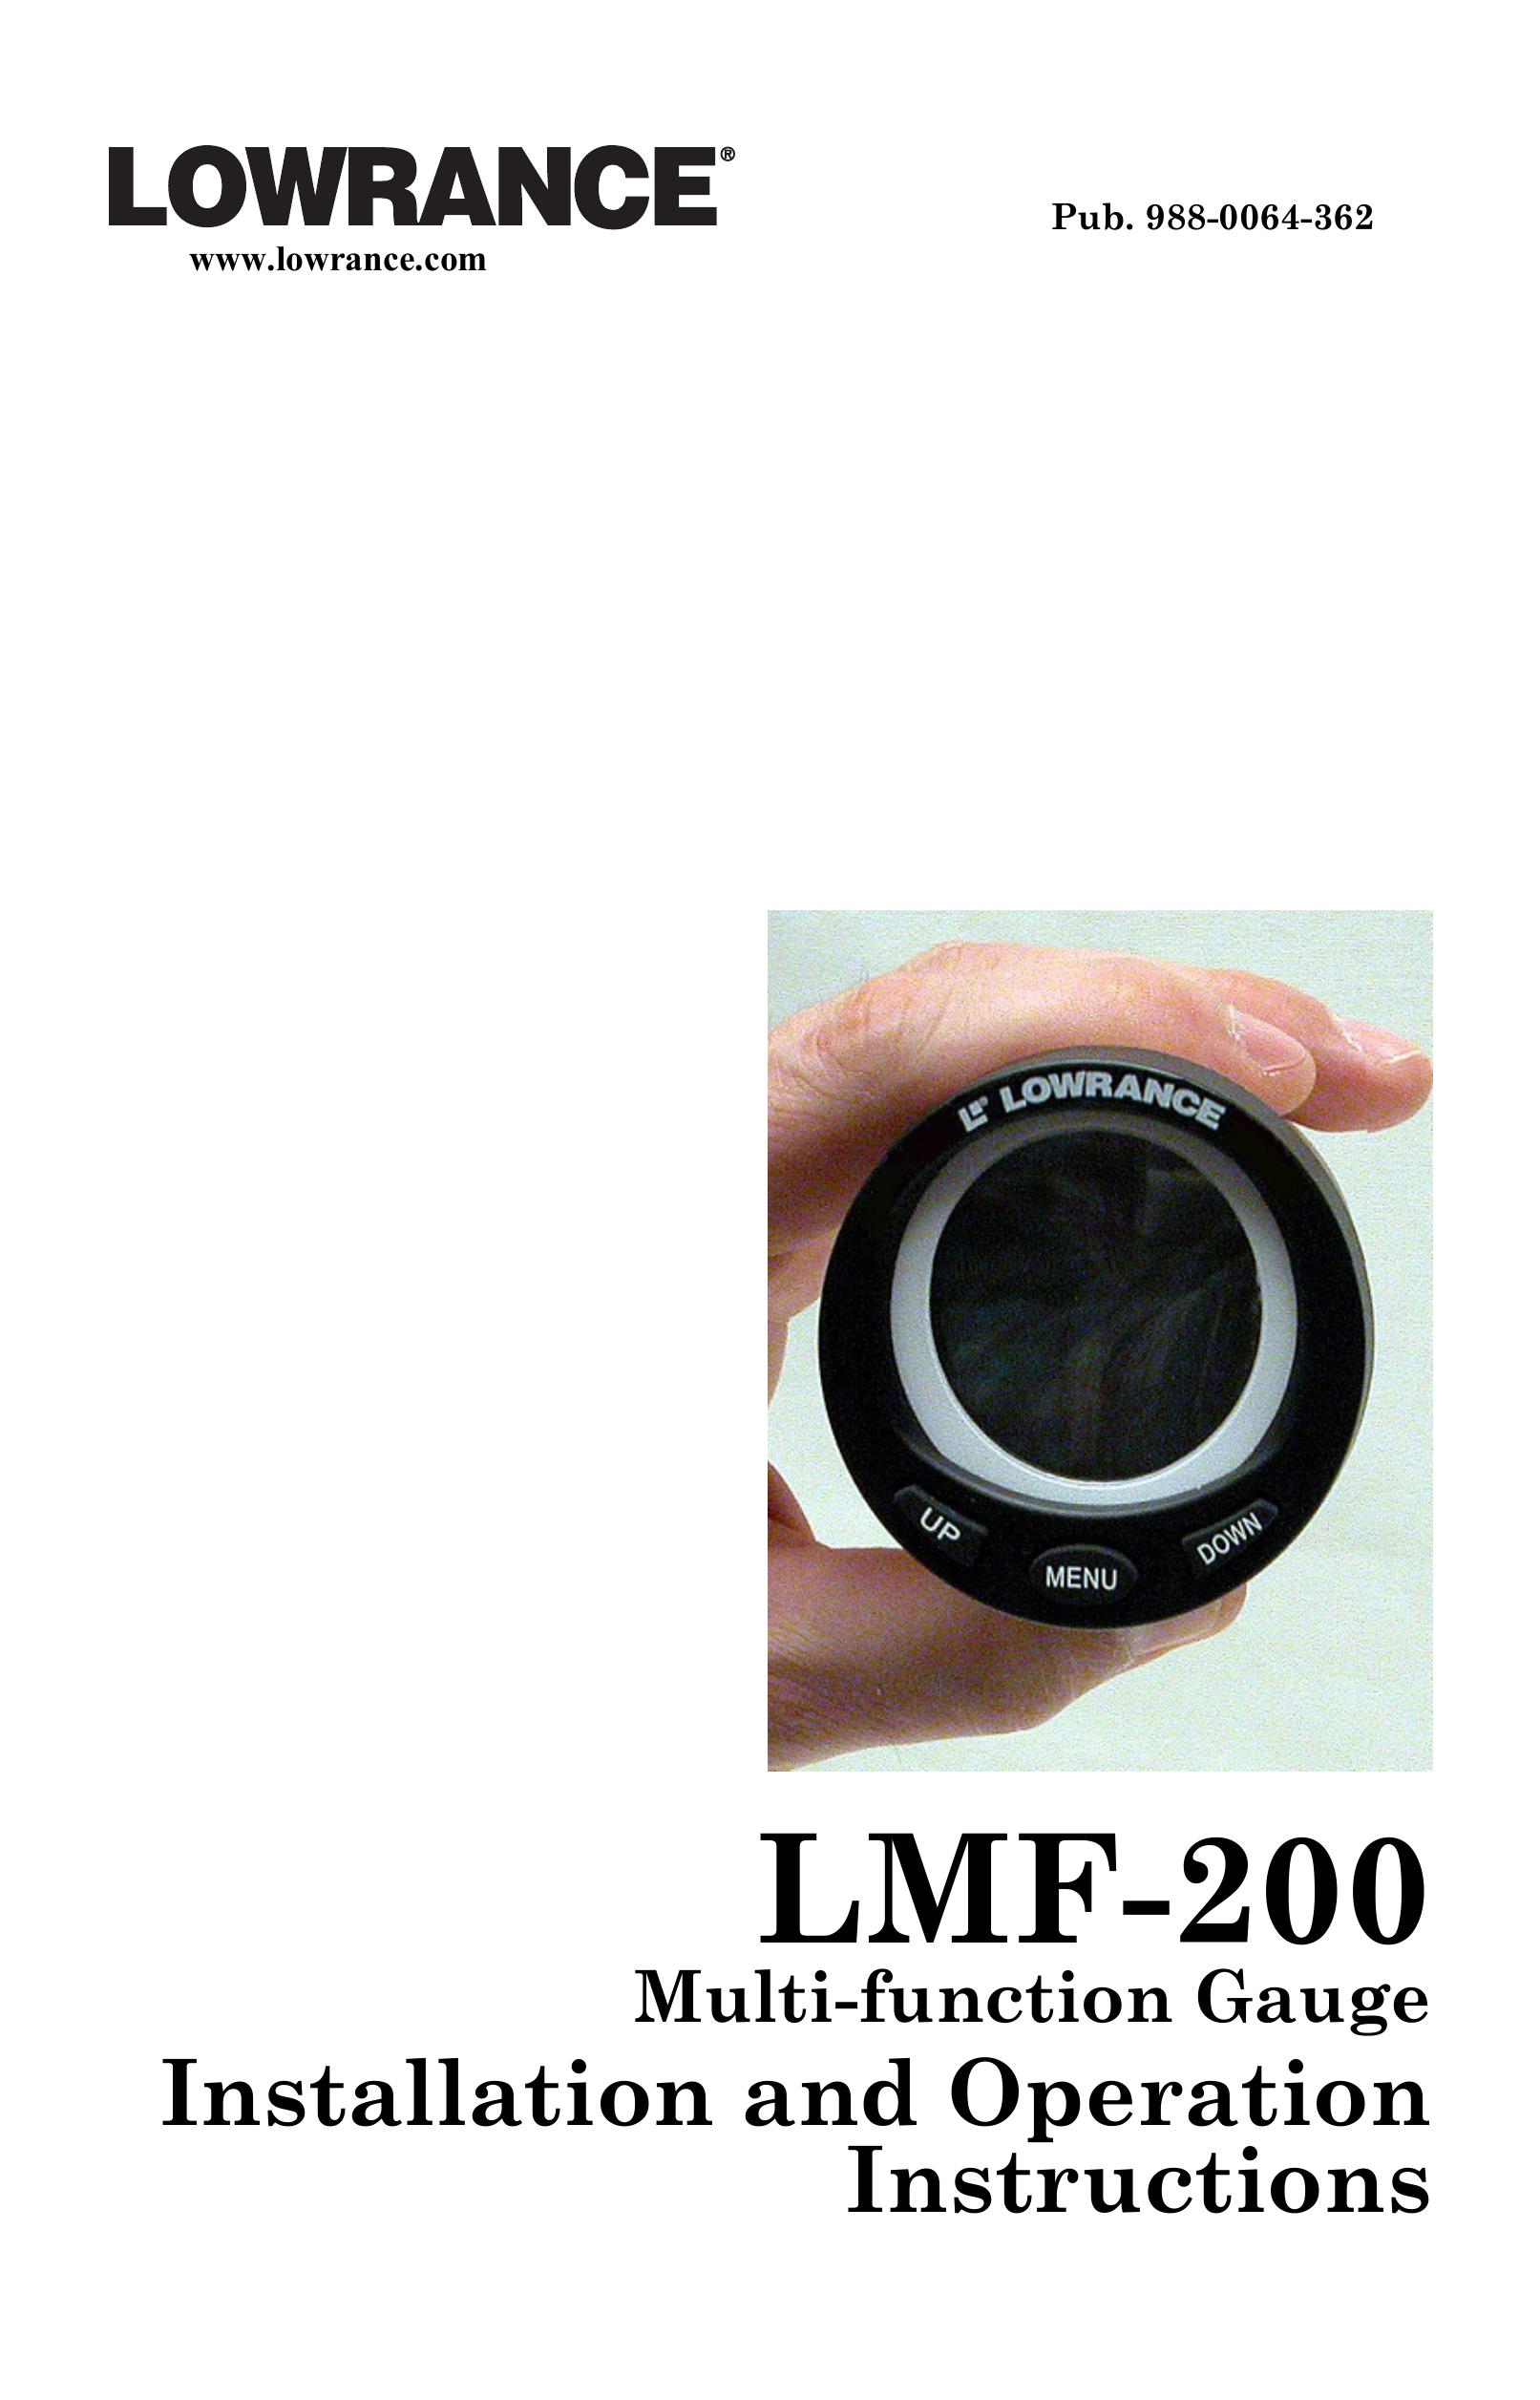 Lowrance electronic LMF-200 Marine Instruments User Manual